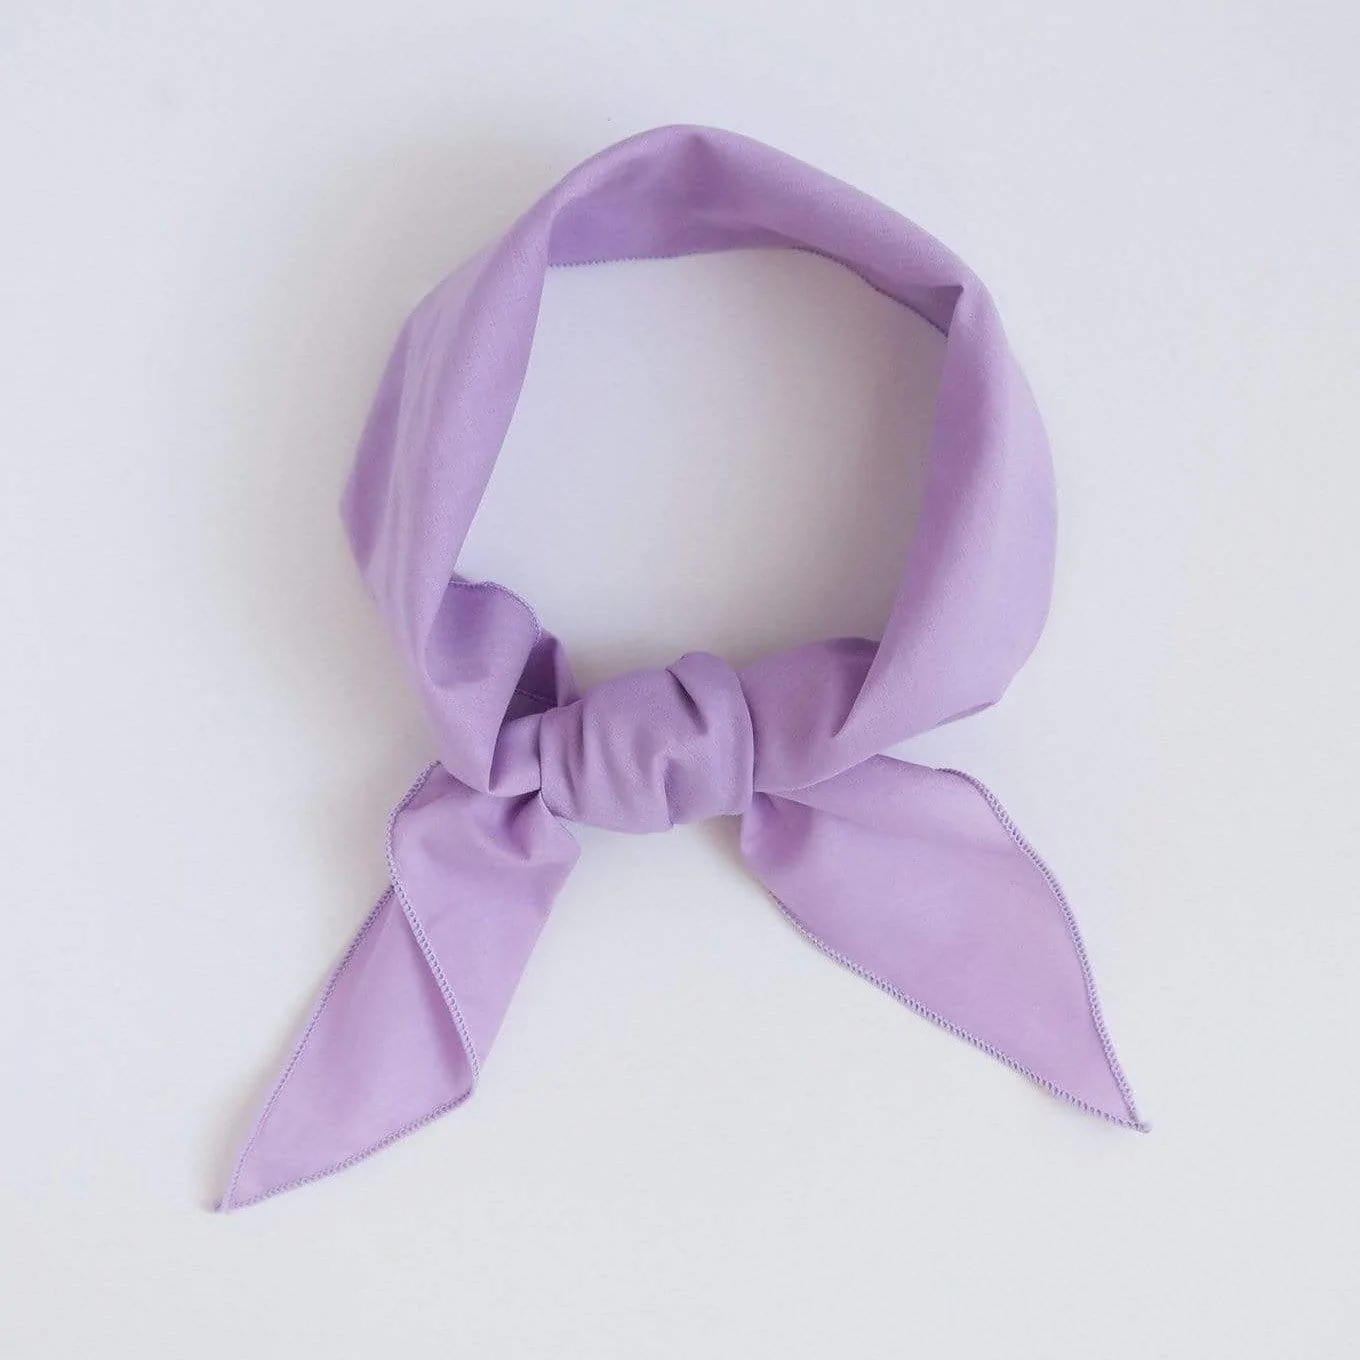 Gotstyle Fashion - Lover's Tempo Scarves Lana Cotton Scarf - Lilac